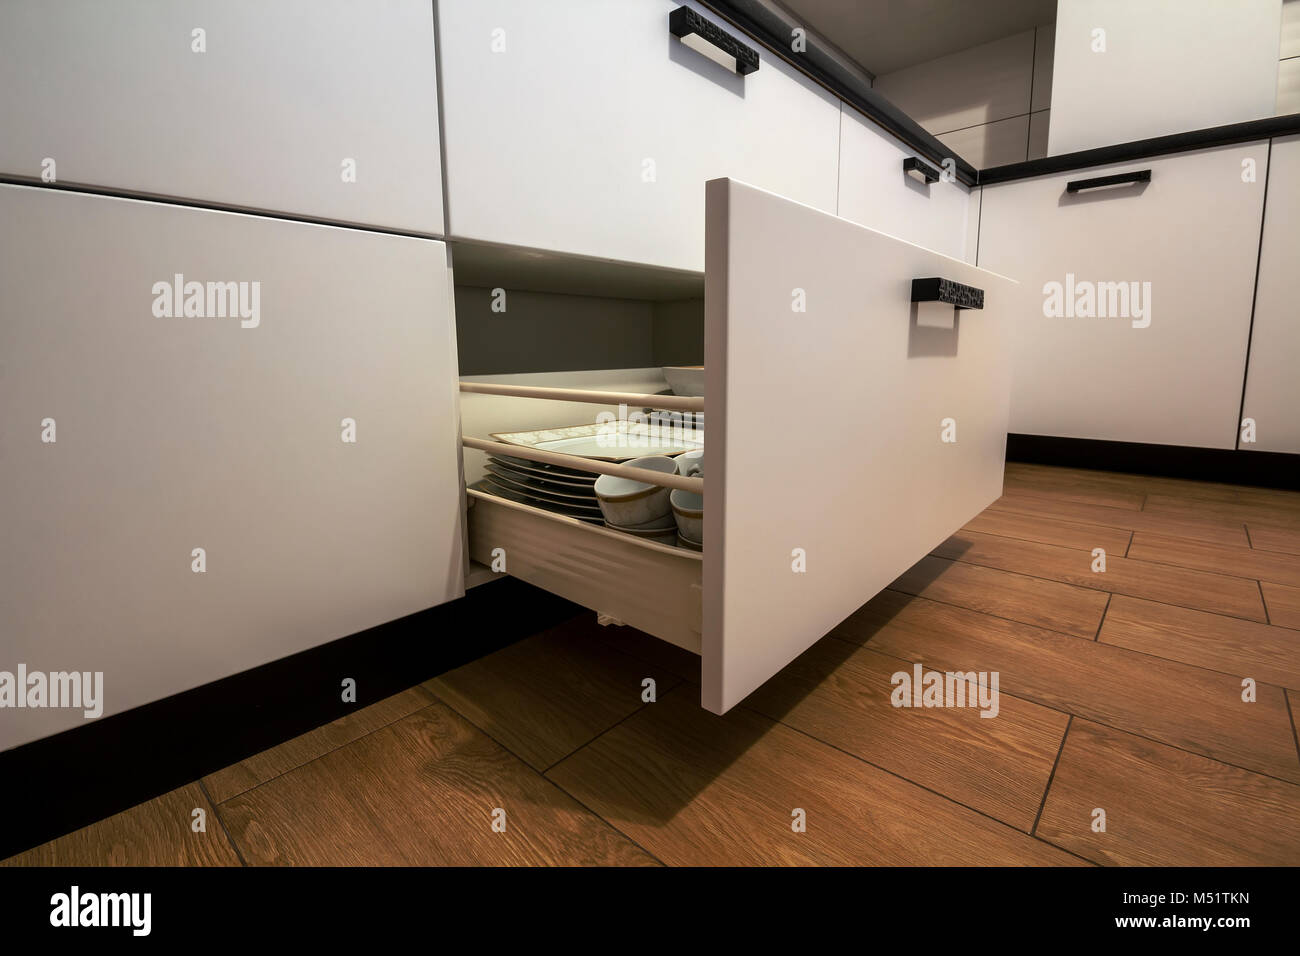 Open Kitchen Drawer With Plates Inside A Smart Solution For